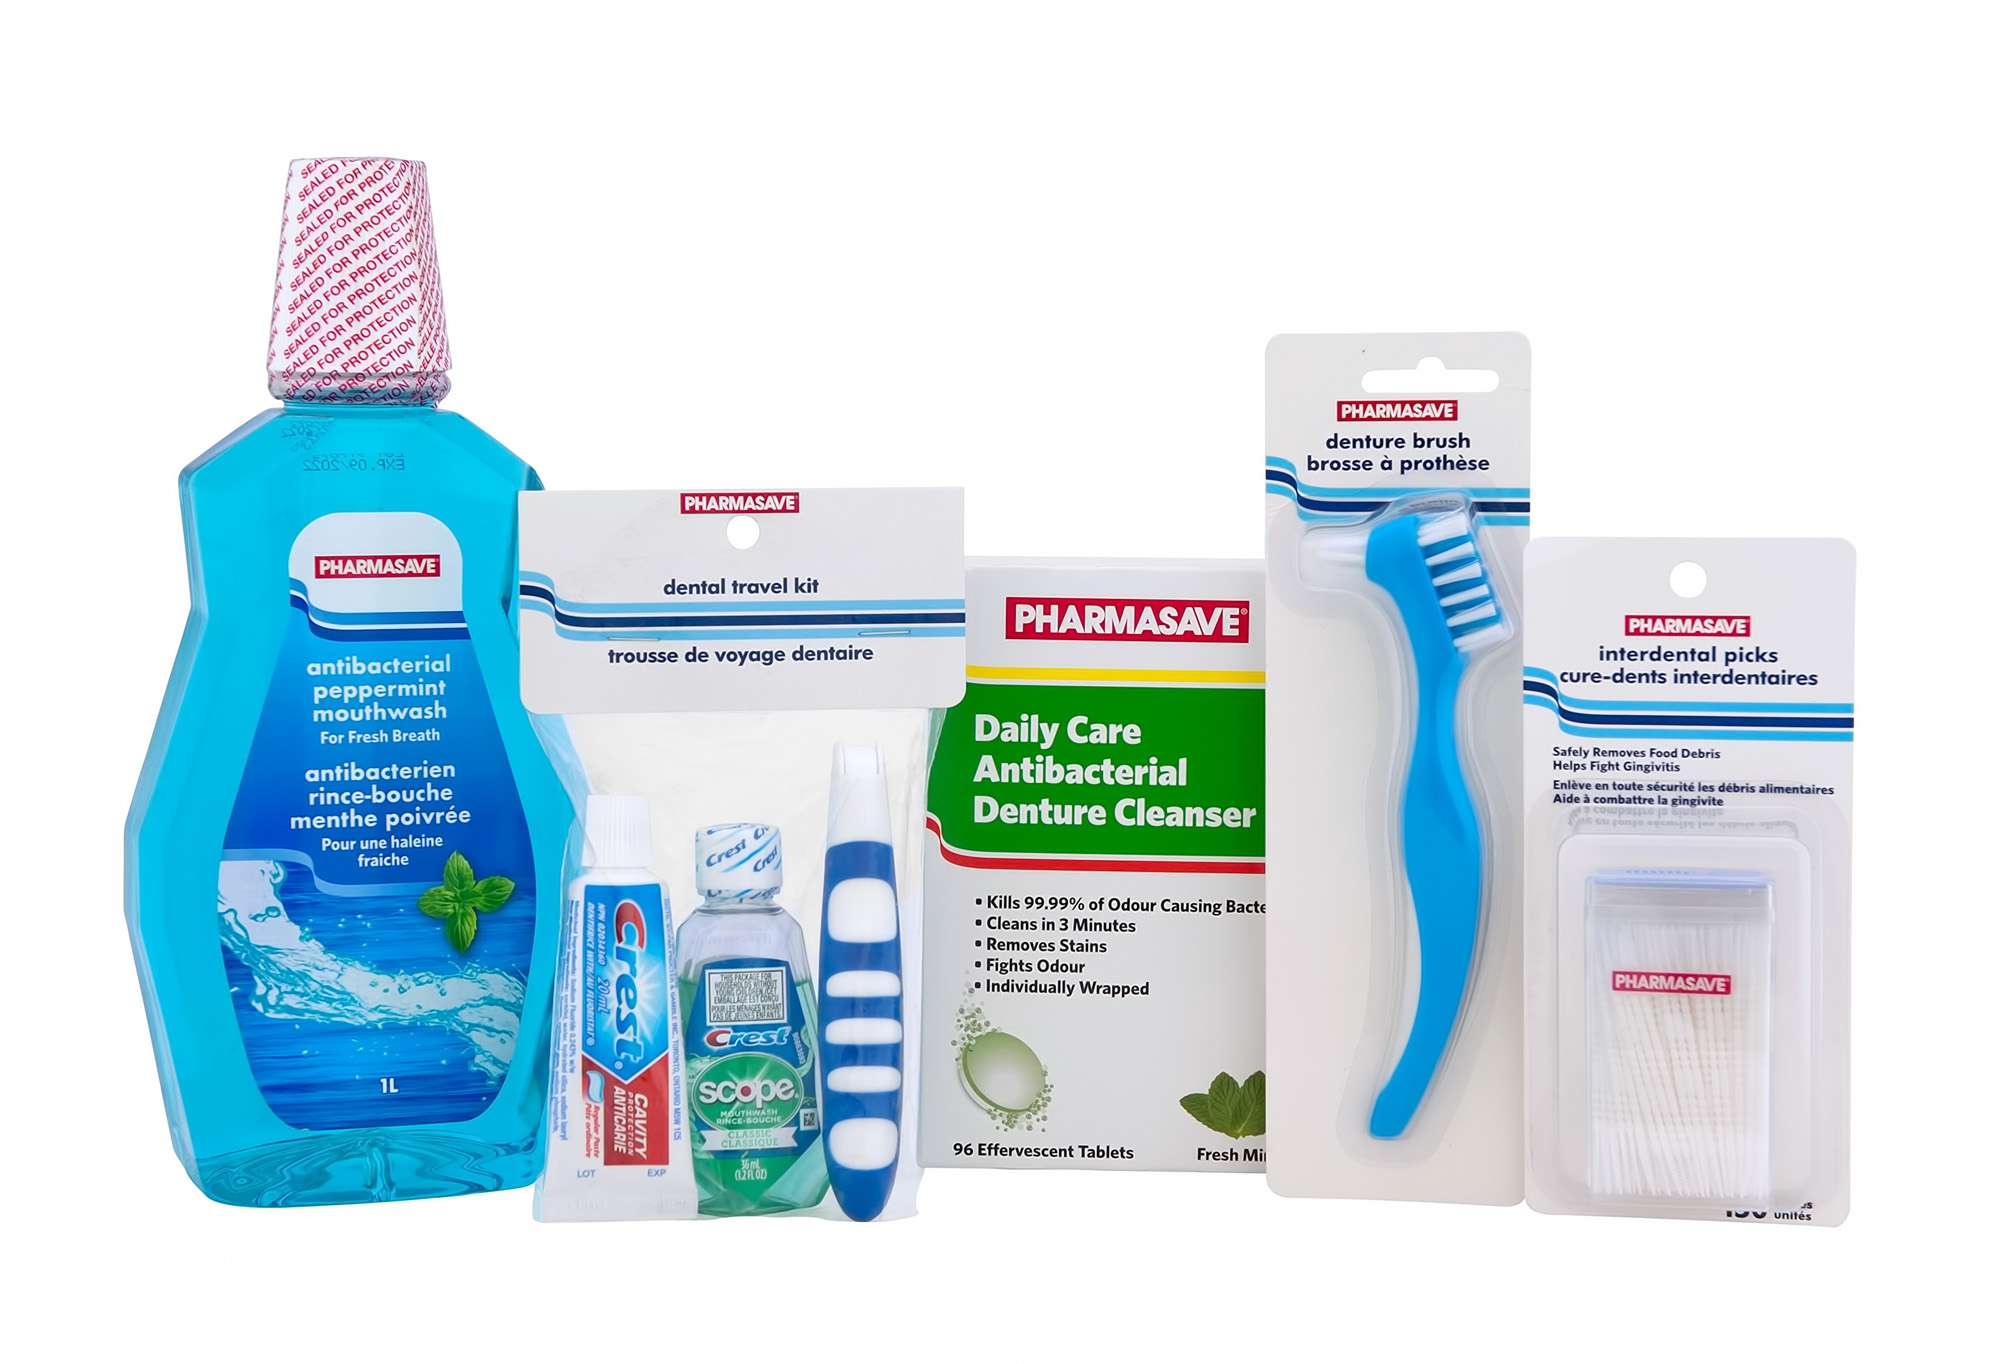 Pharmasave Brand oral health products.